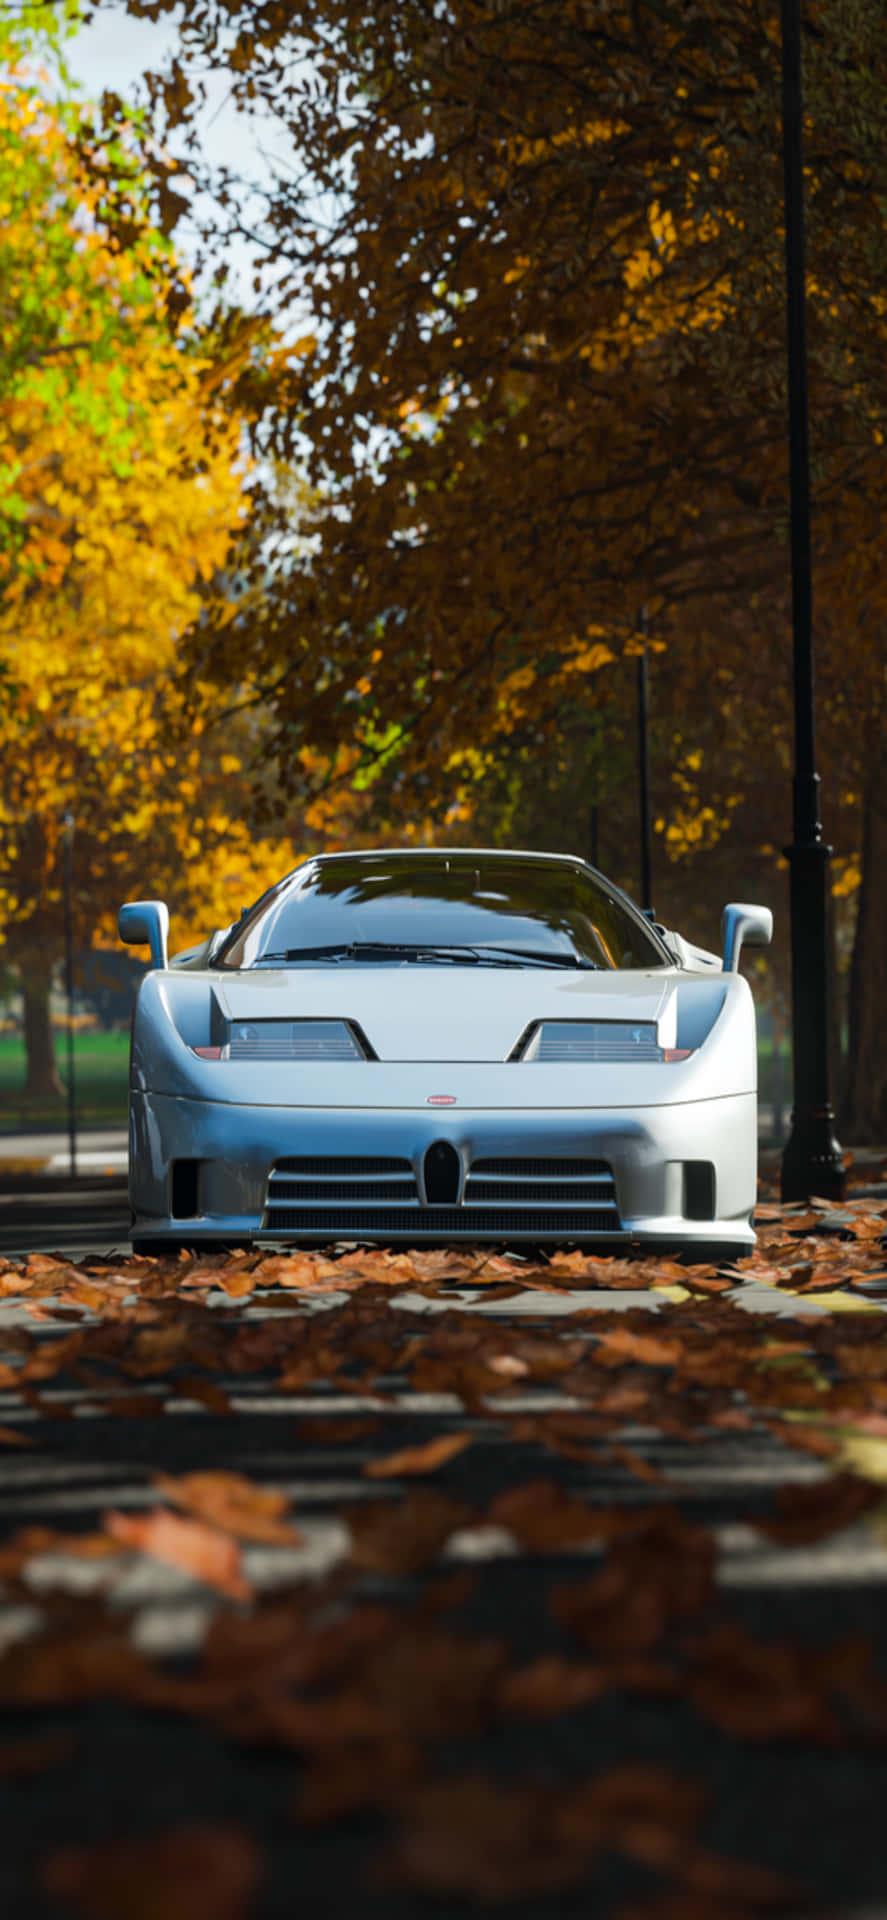 Explore Your Boundaries with iPhone Xs and Forza Horizon 4